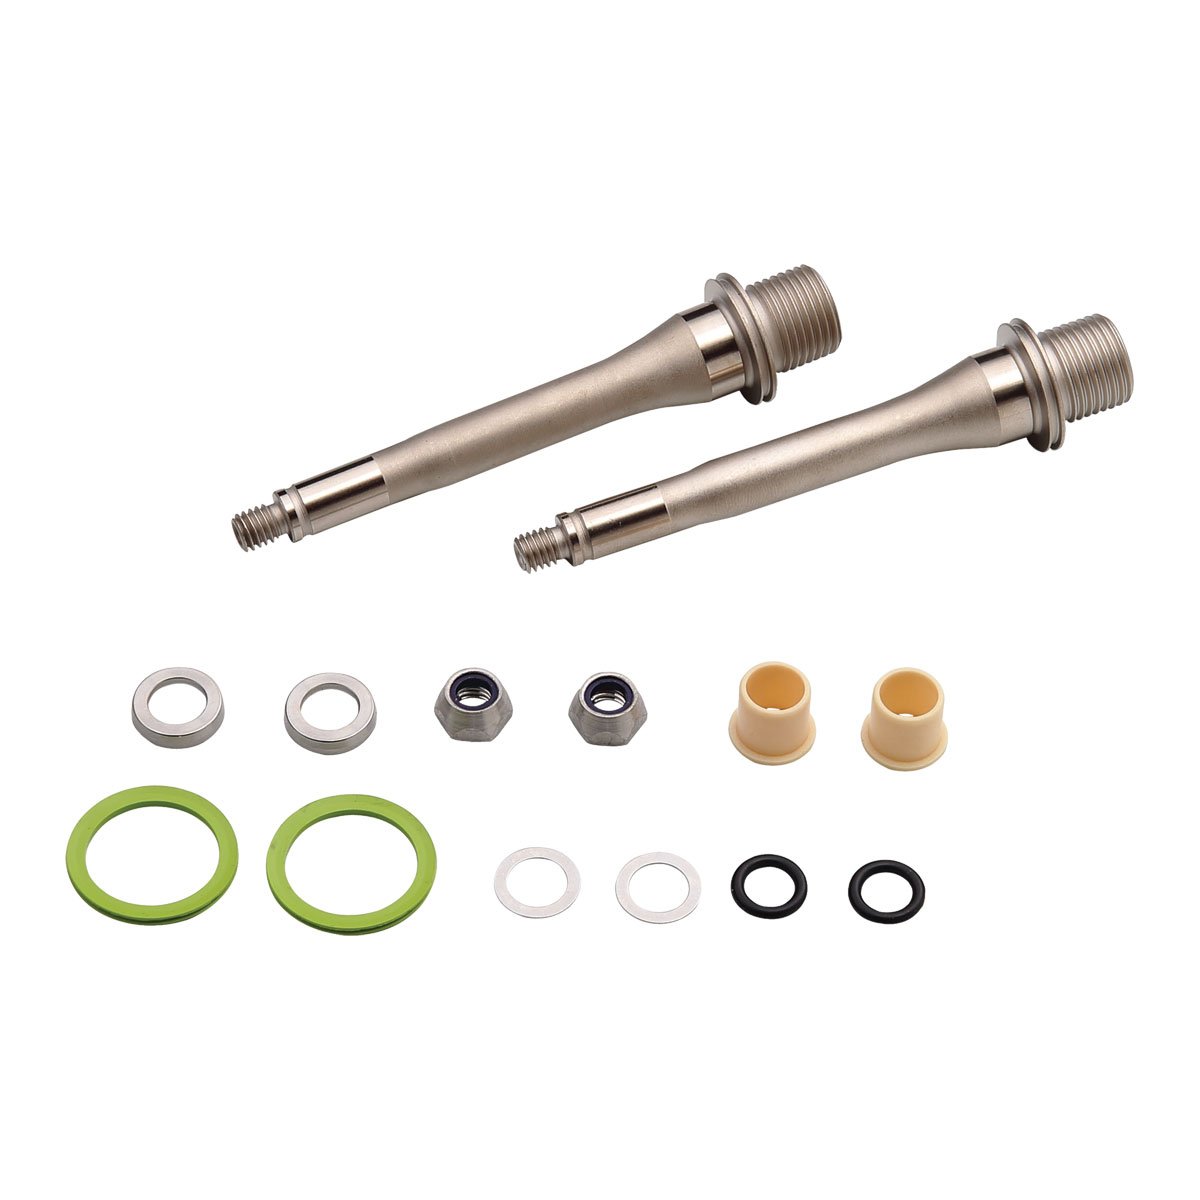 SPANK Axle Rebuild Kit compatible with all SPIKE & OOZY pedals produced after 2014